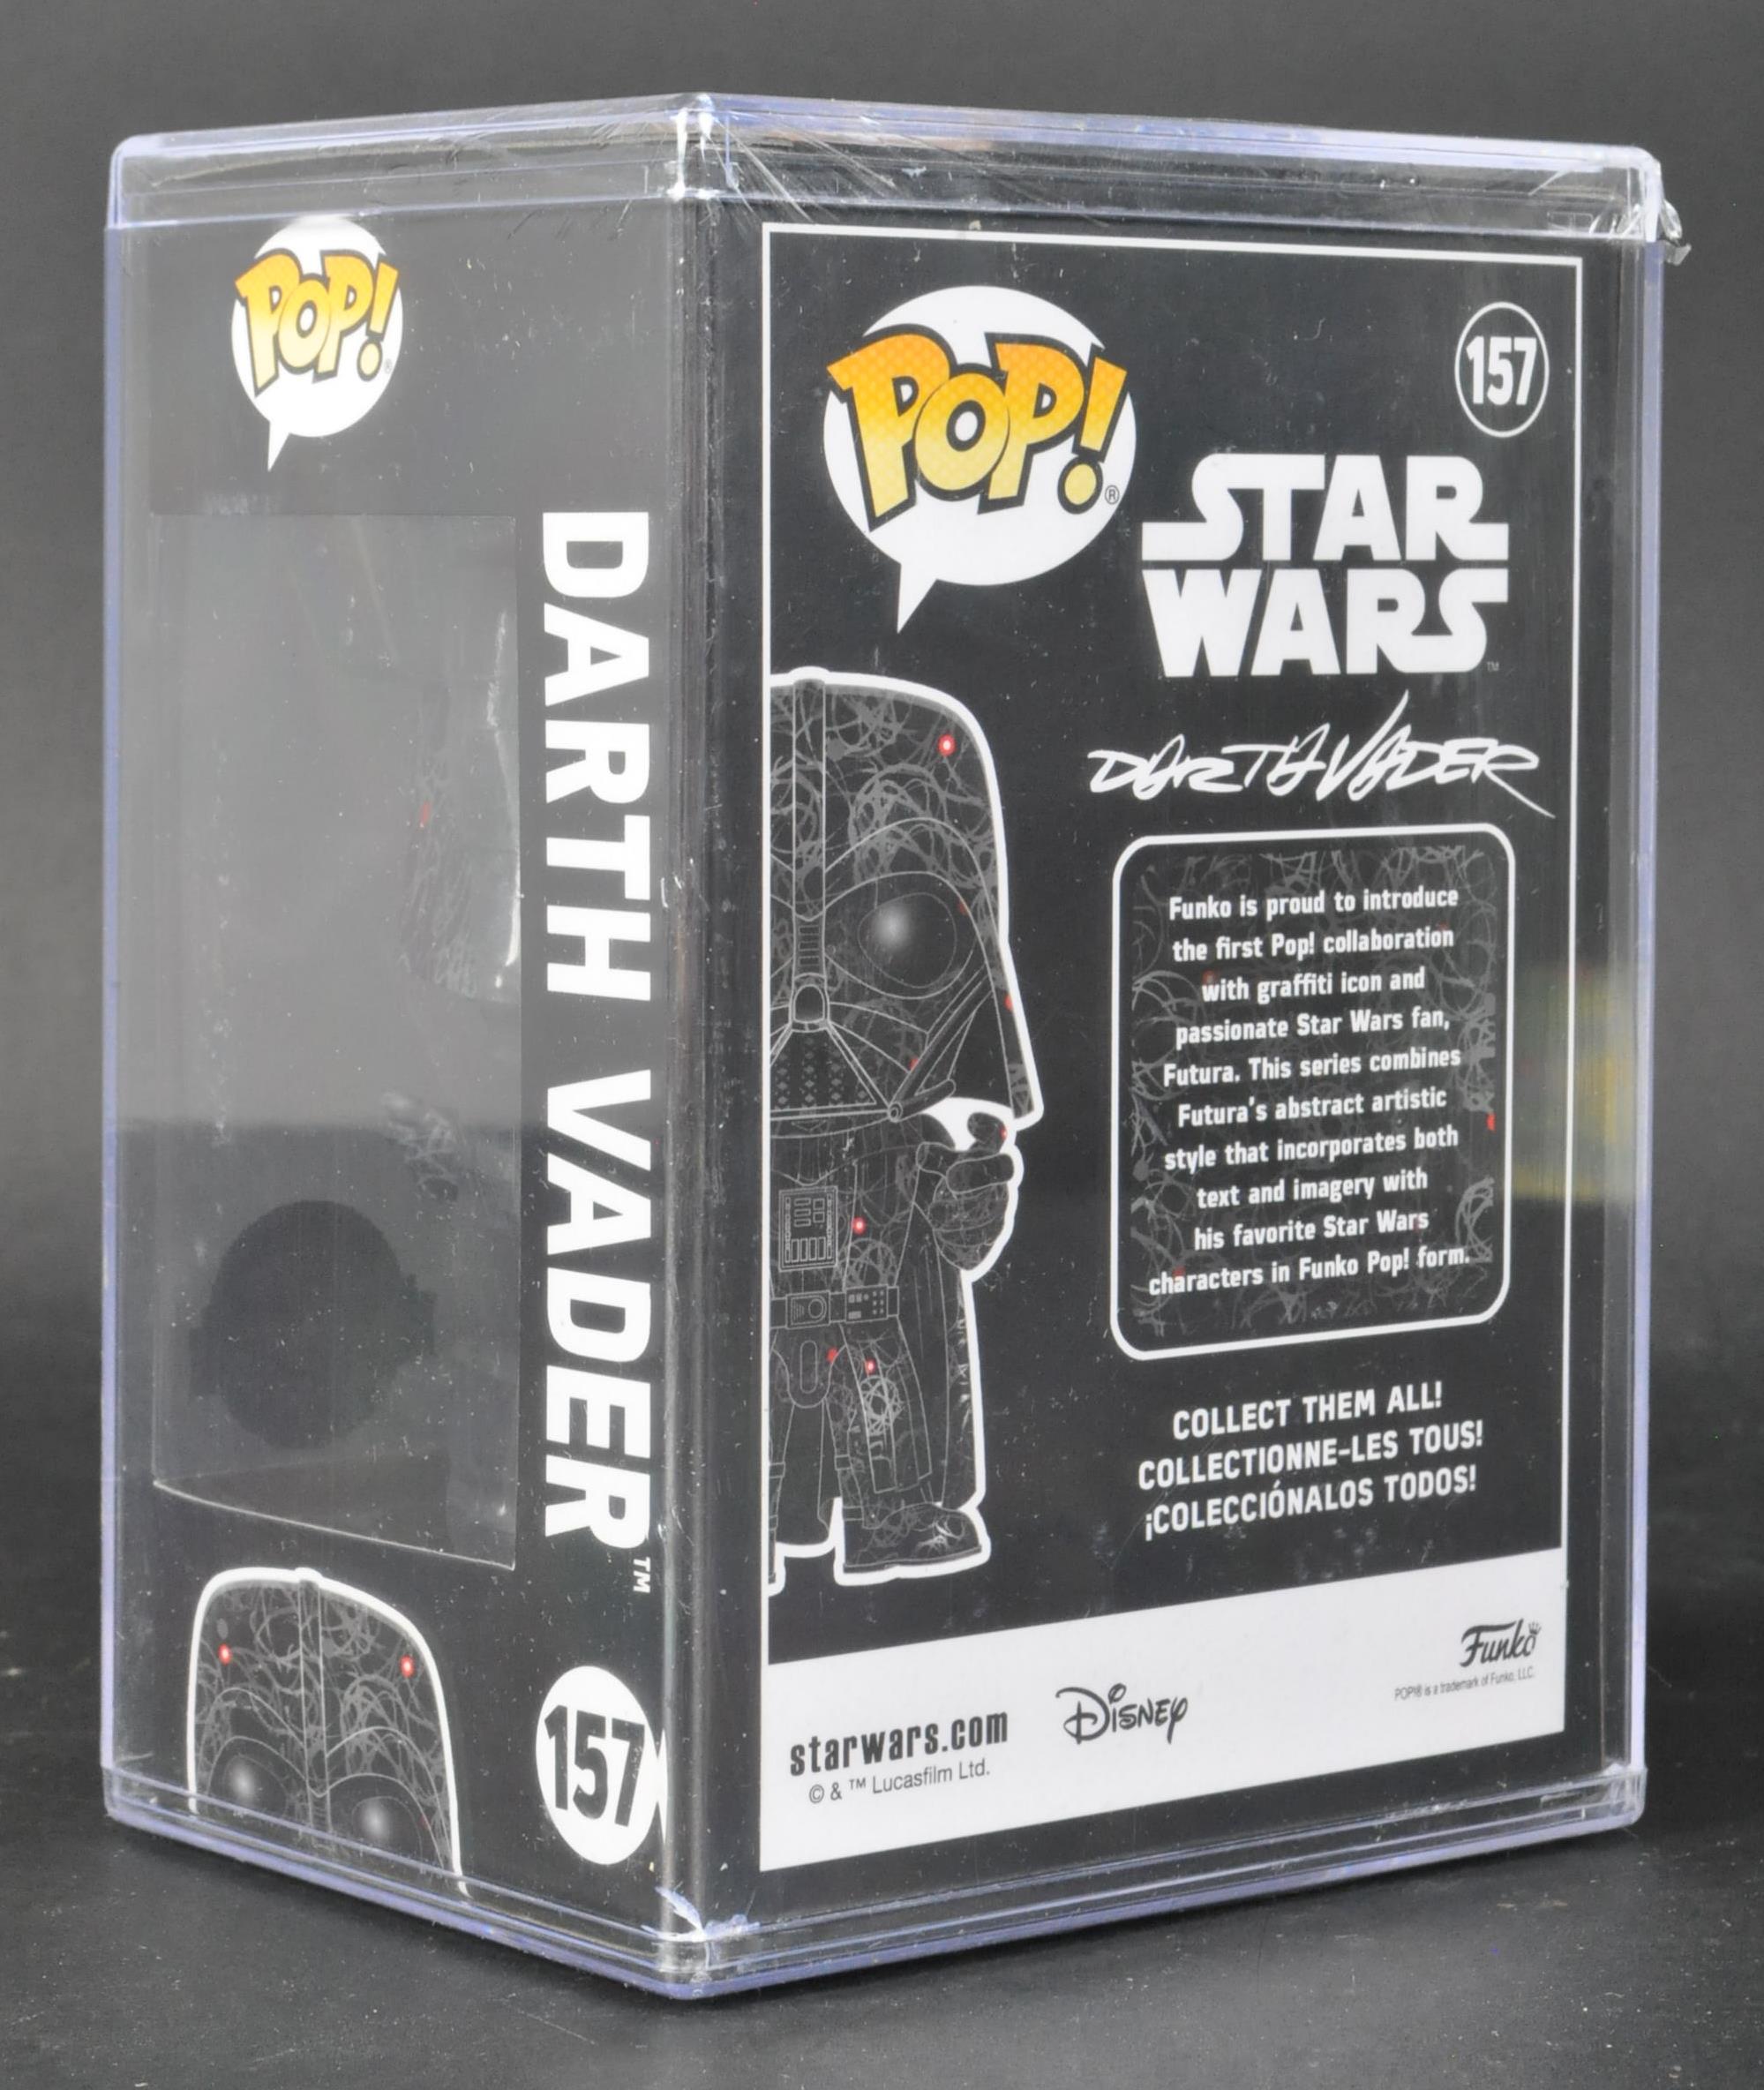 ESTATE OF DAVE PROWSE - STAR WARS - FUNKO POP DARTH VADER EXCLUSIVE - Image 2 of 3